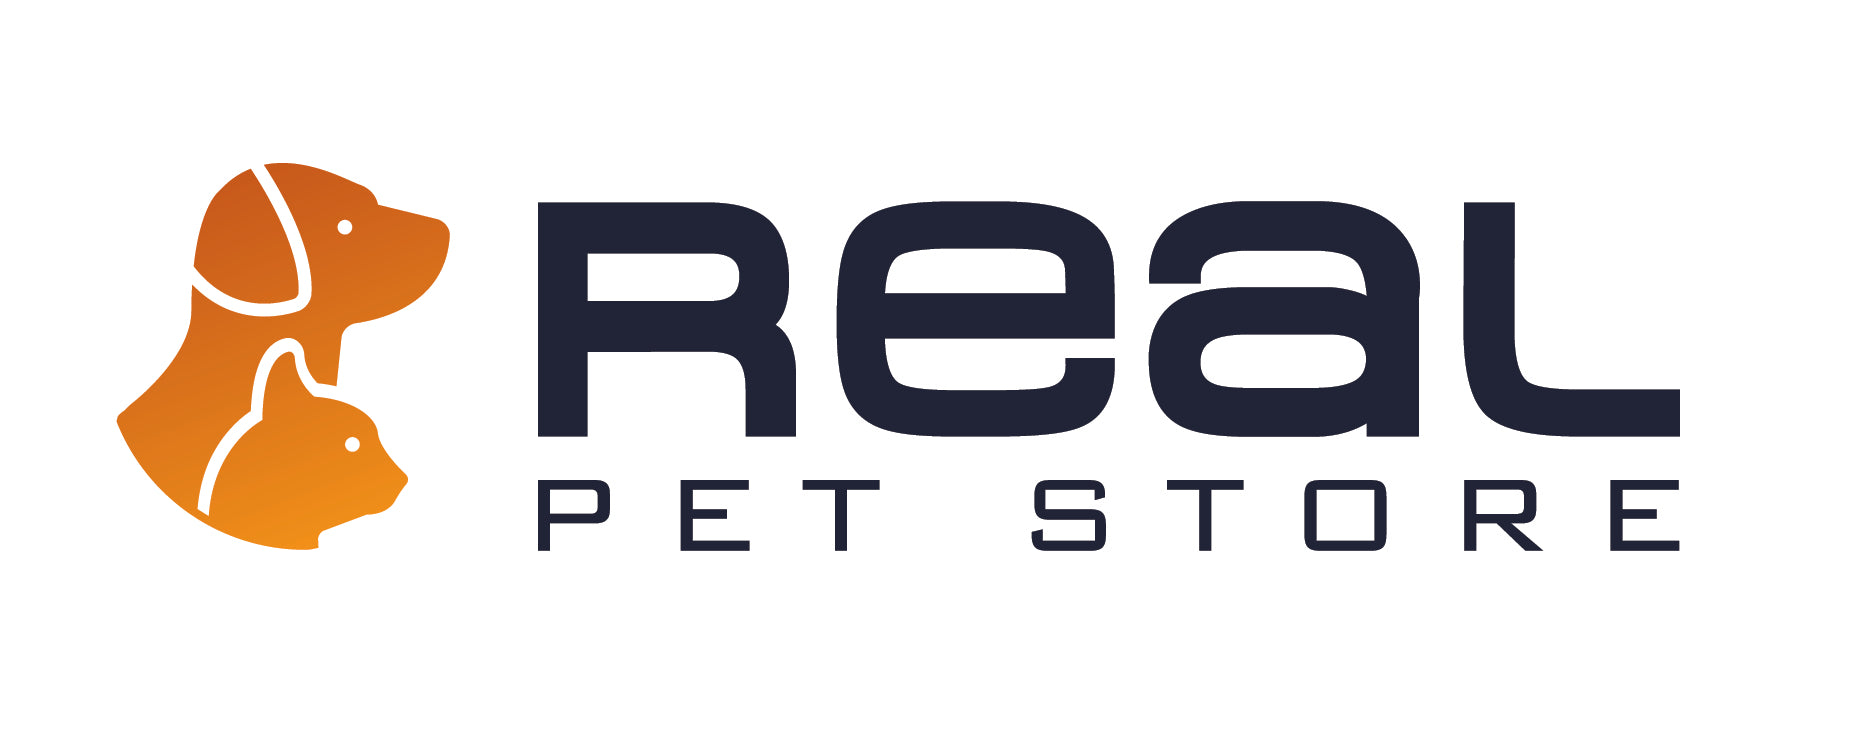 Did you know we also have a Pet website?